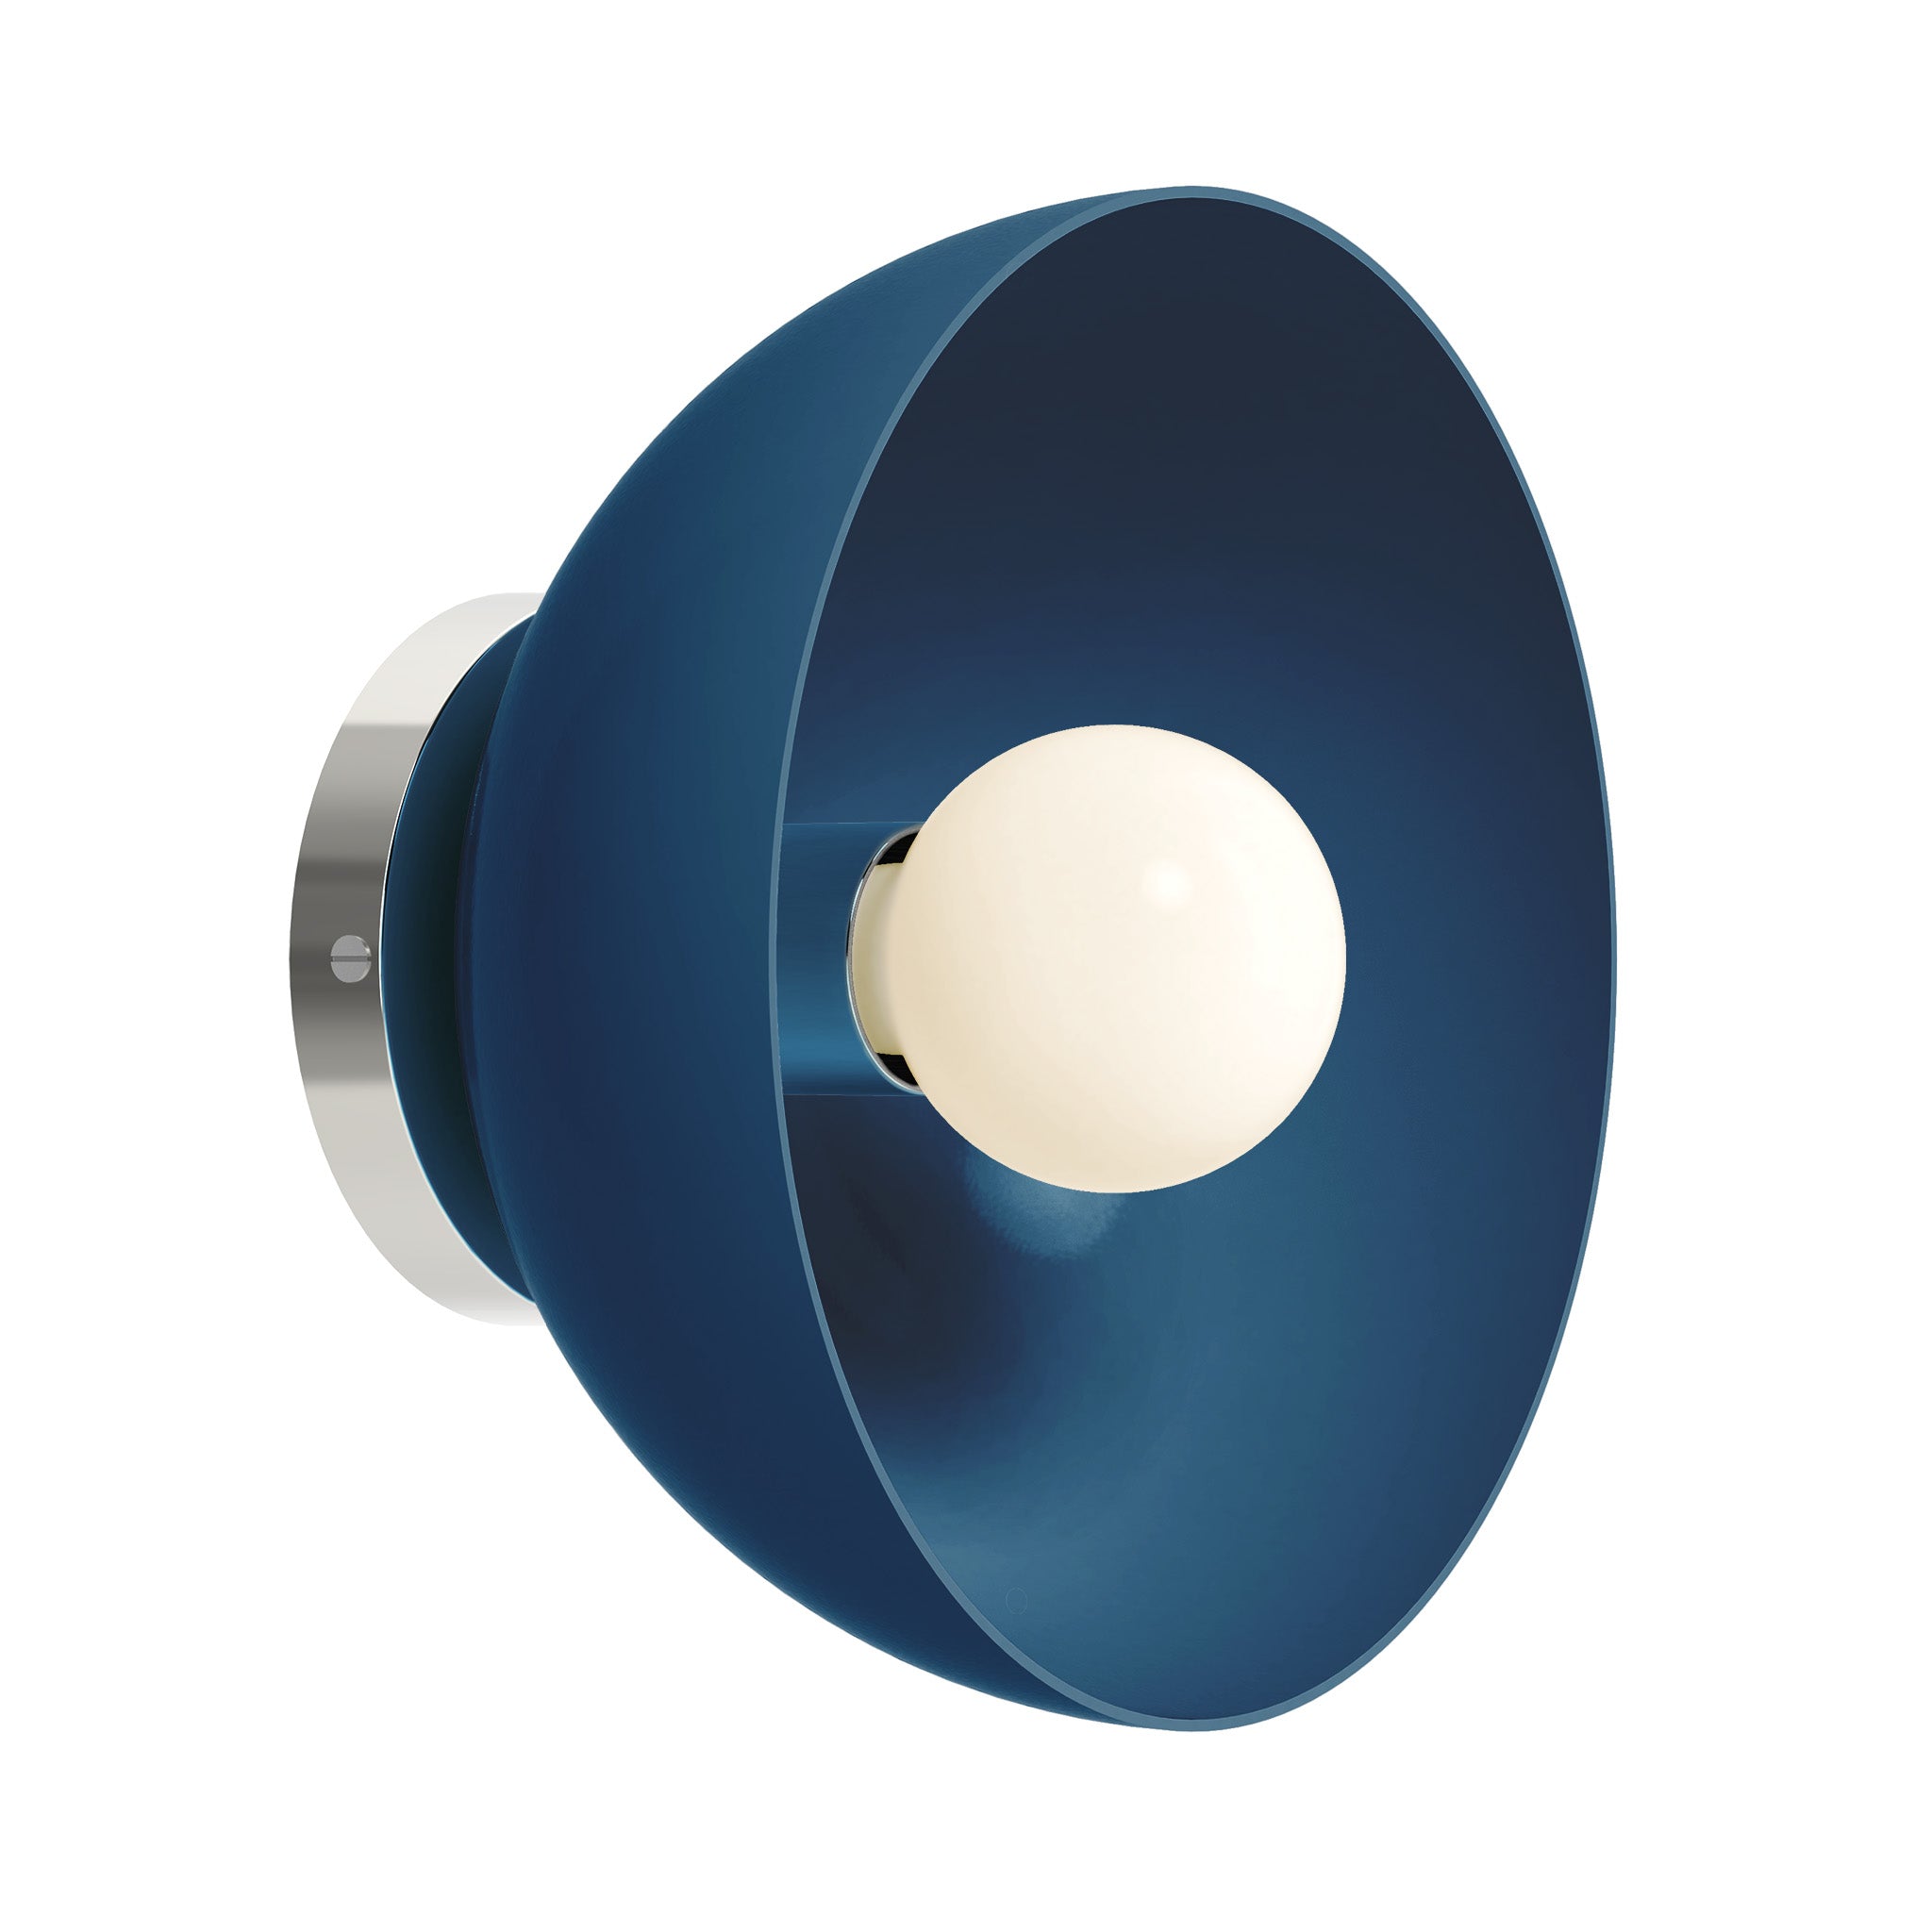 Nickel and slate blue color hemi dome wall sconce 10" dutton brown lighting